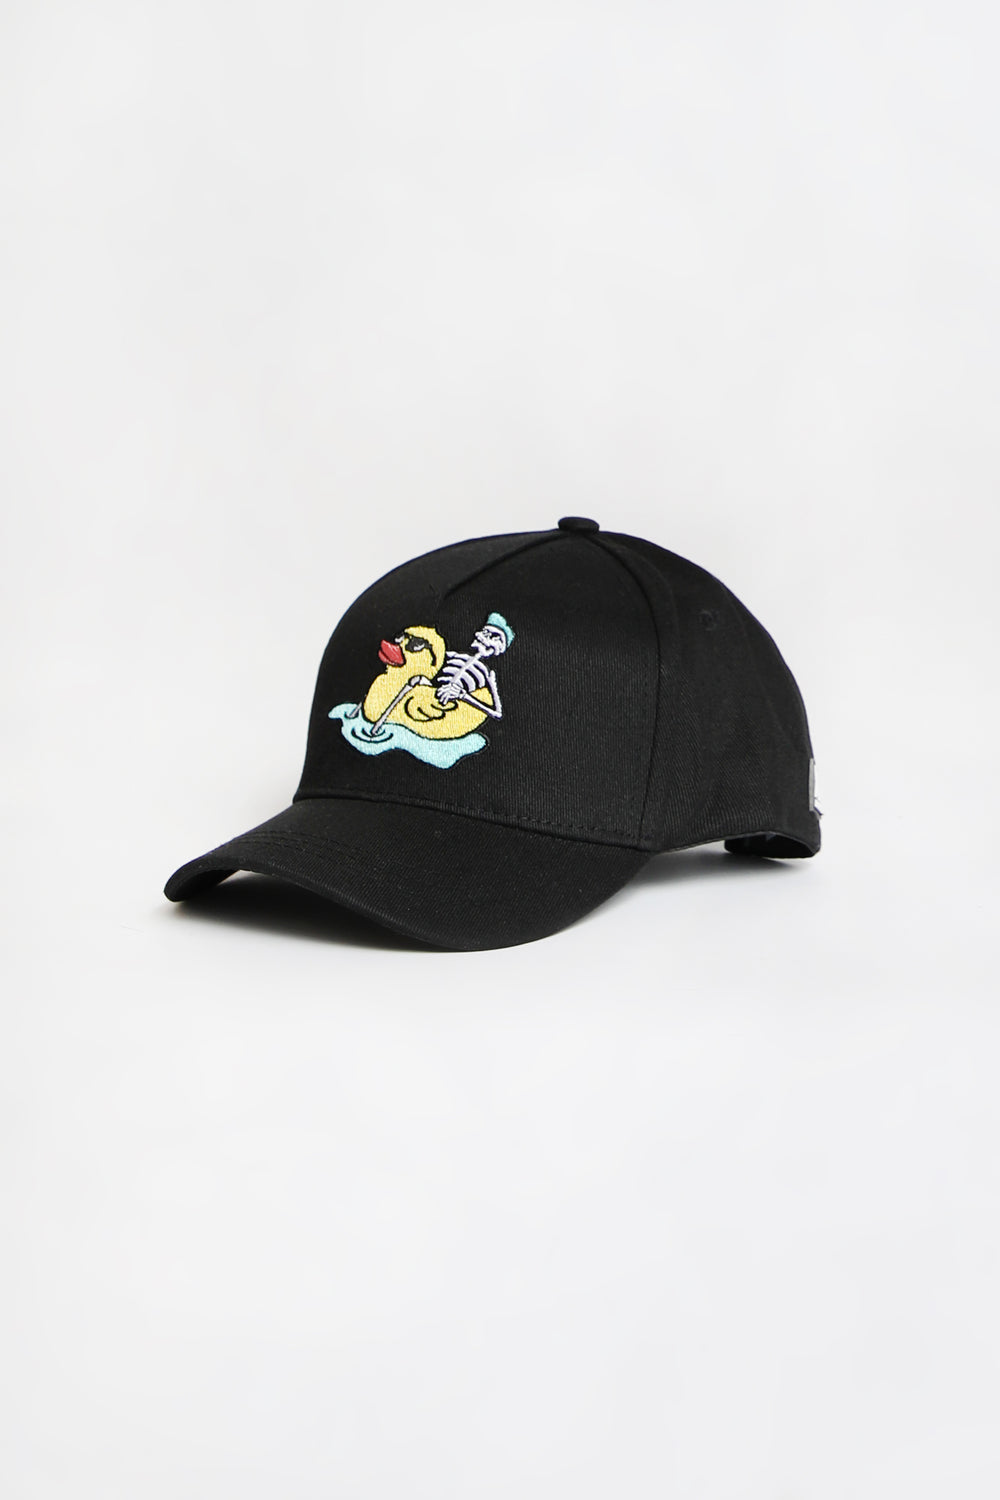 Arsenic Youth Duck Patch Baseball Hat Black